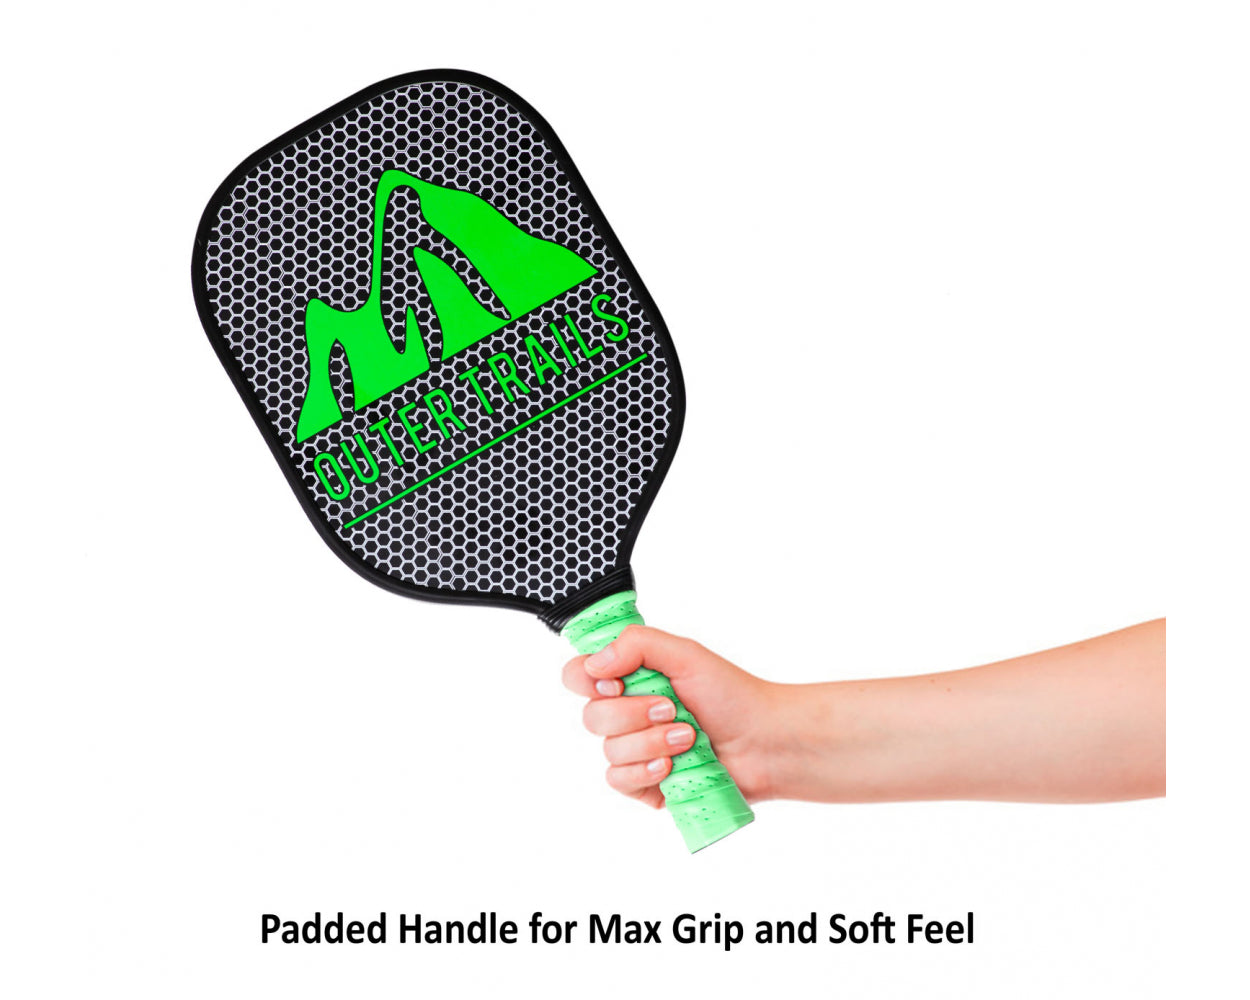 Outer Trails Pickleball Set with Two Paddles, 4 Pickleballs, Individual Protective Cases for Each Paddle, and Free Carry Bag